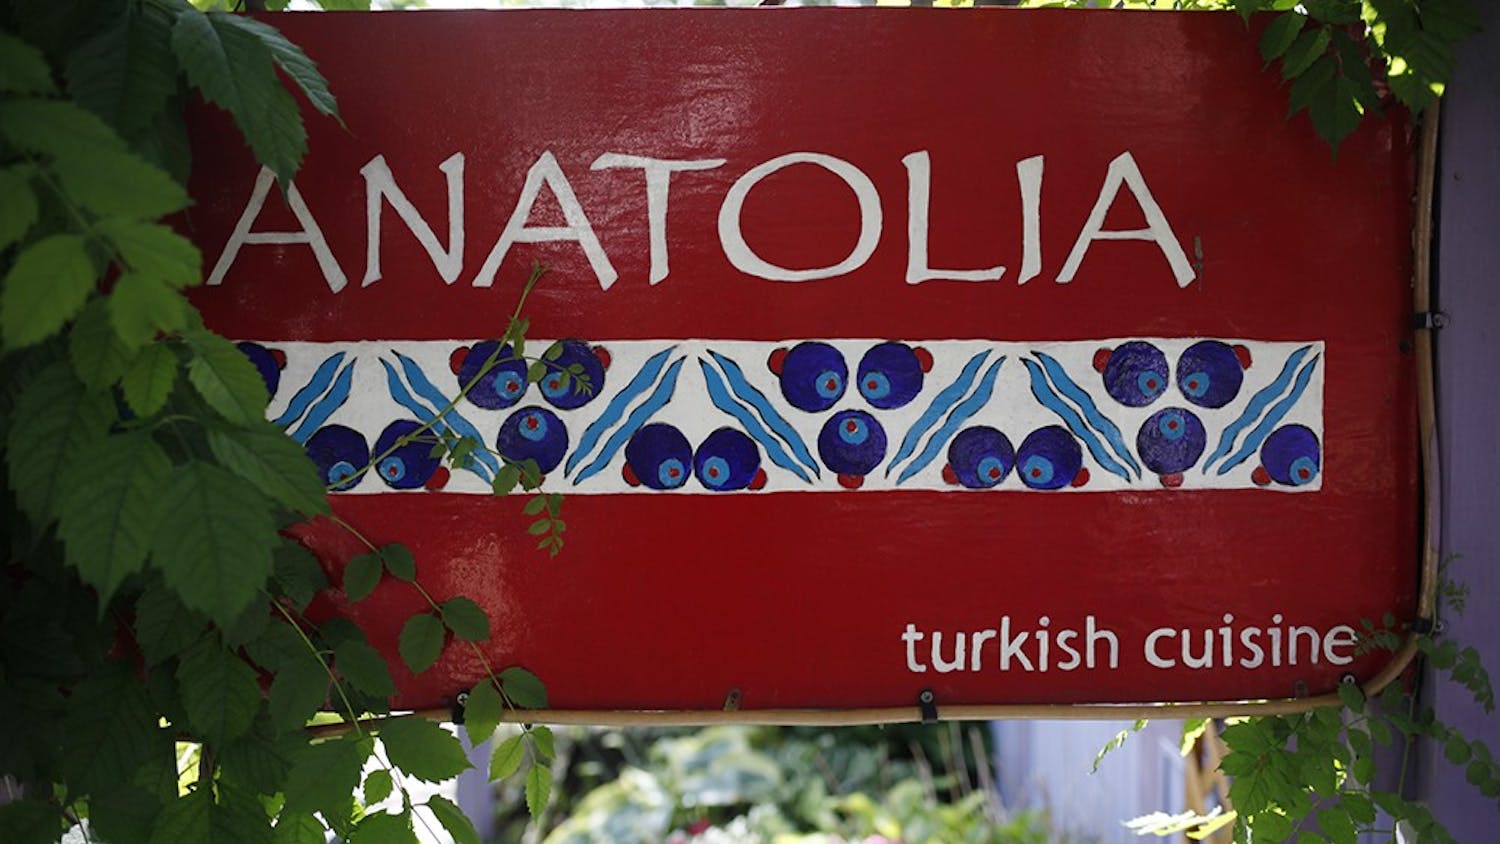 Anatolia, a Turkish restaurant located on 4th St., was recently voted as the best Bloomington ethnic restaurant in 2014.